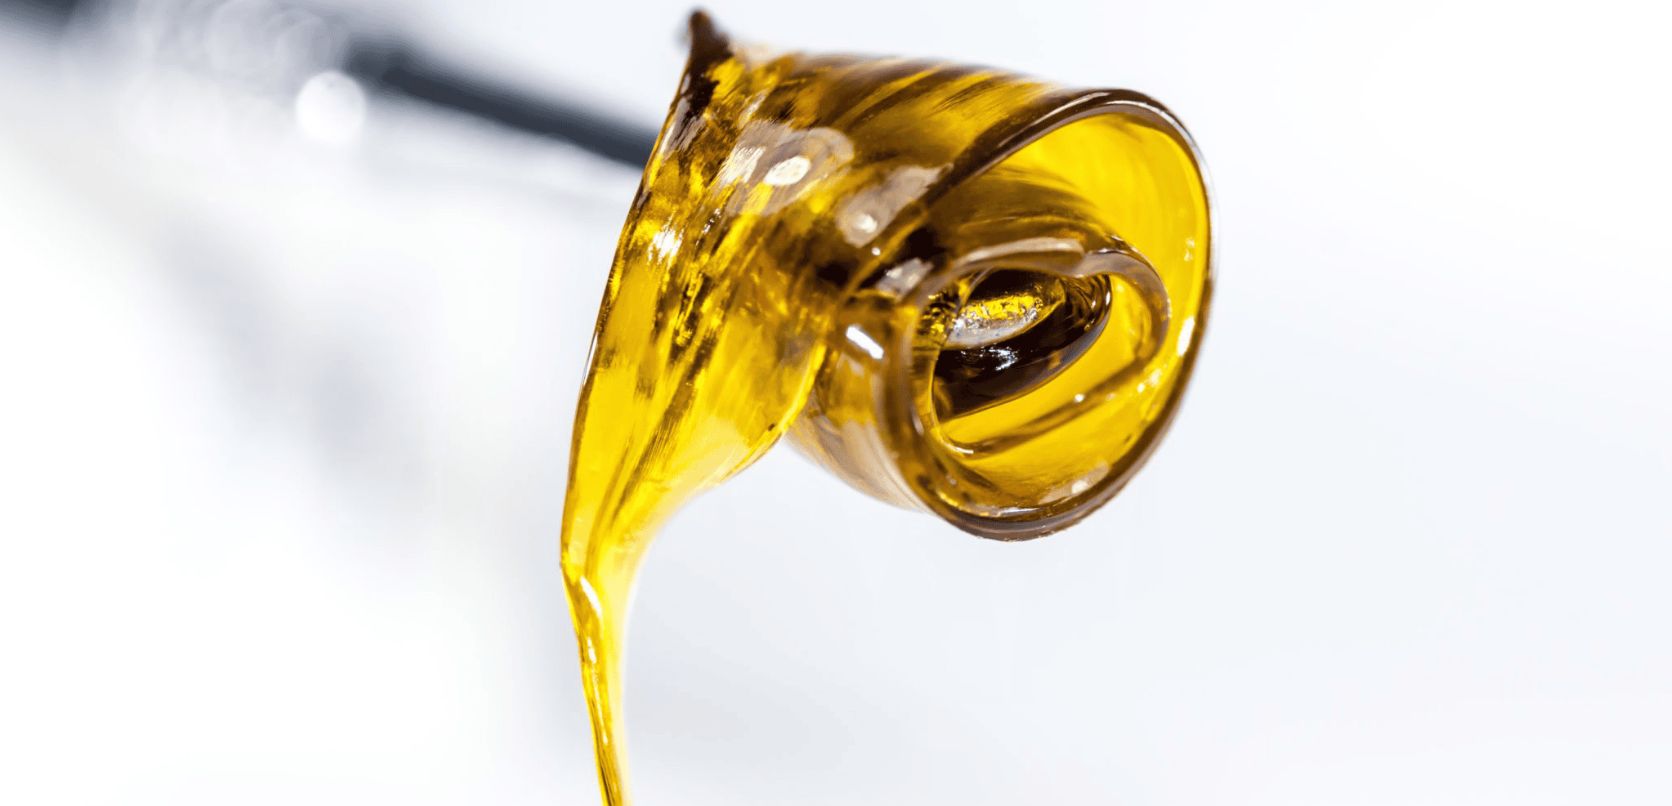 Top-quality THC distillate can cost anywhere from $100 and up. While that is a high price point, the distillate will last you an eternity. So, you're saving money in the long run!